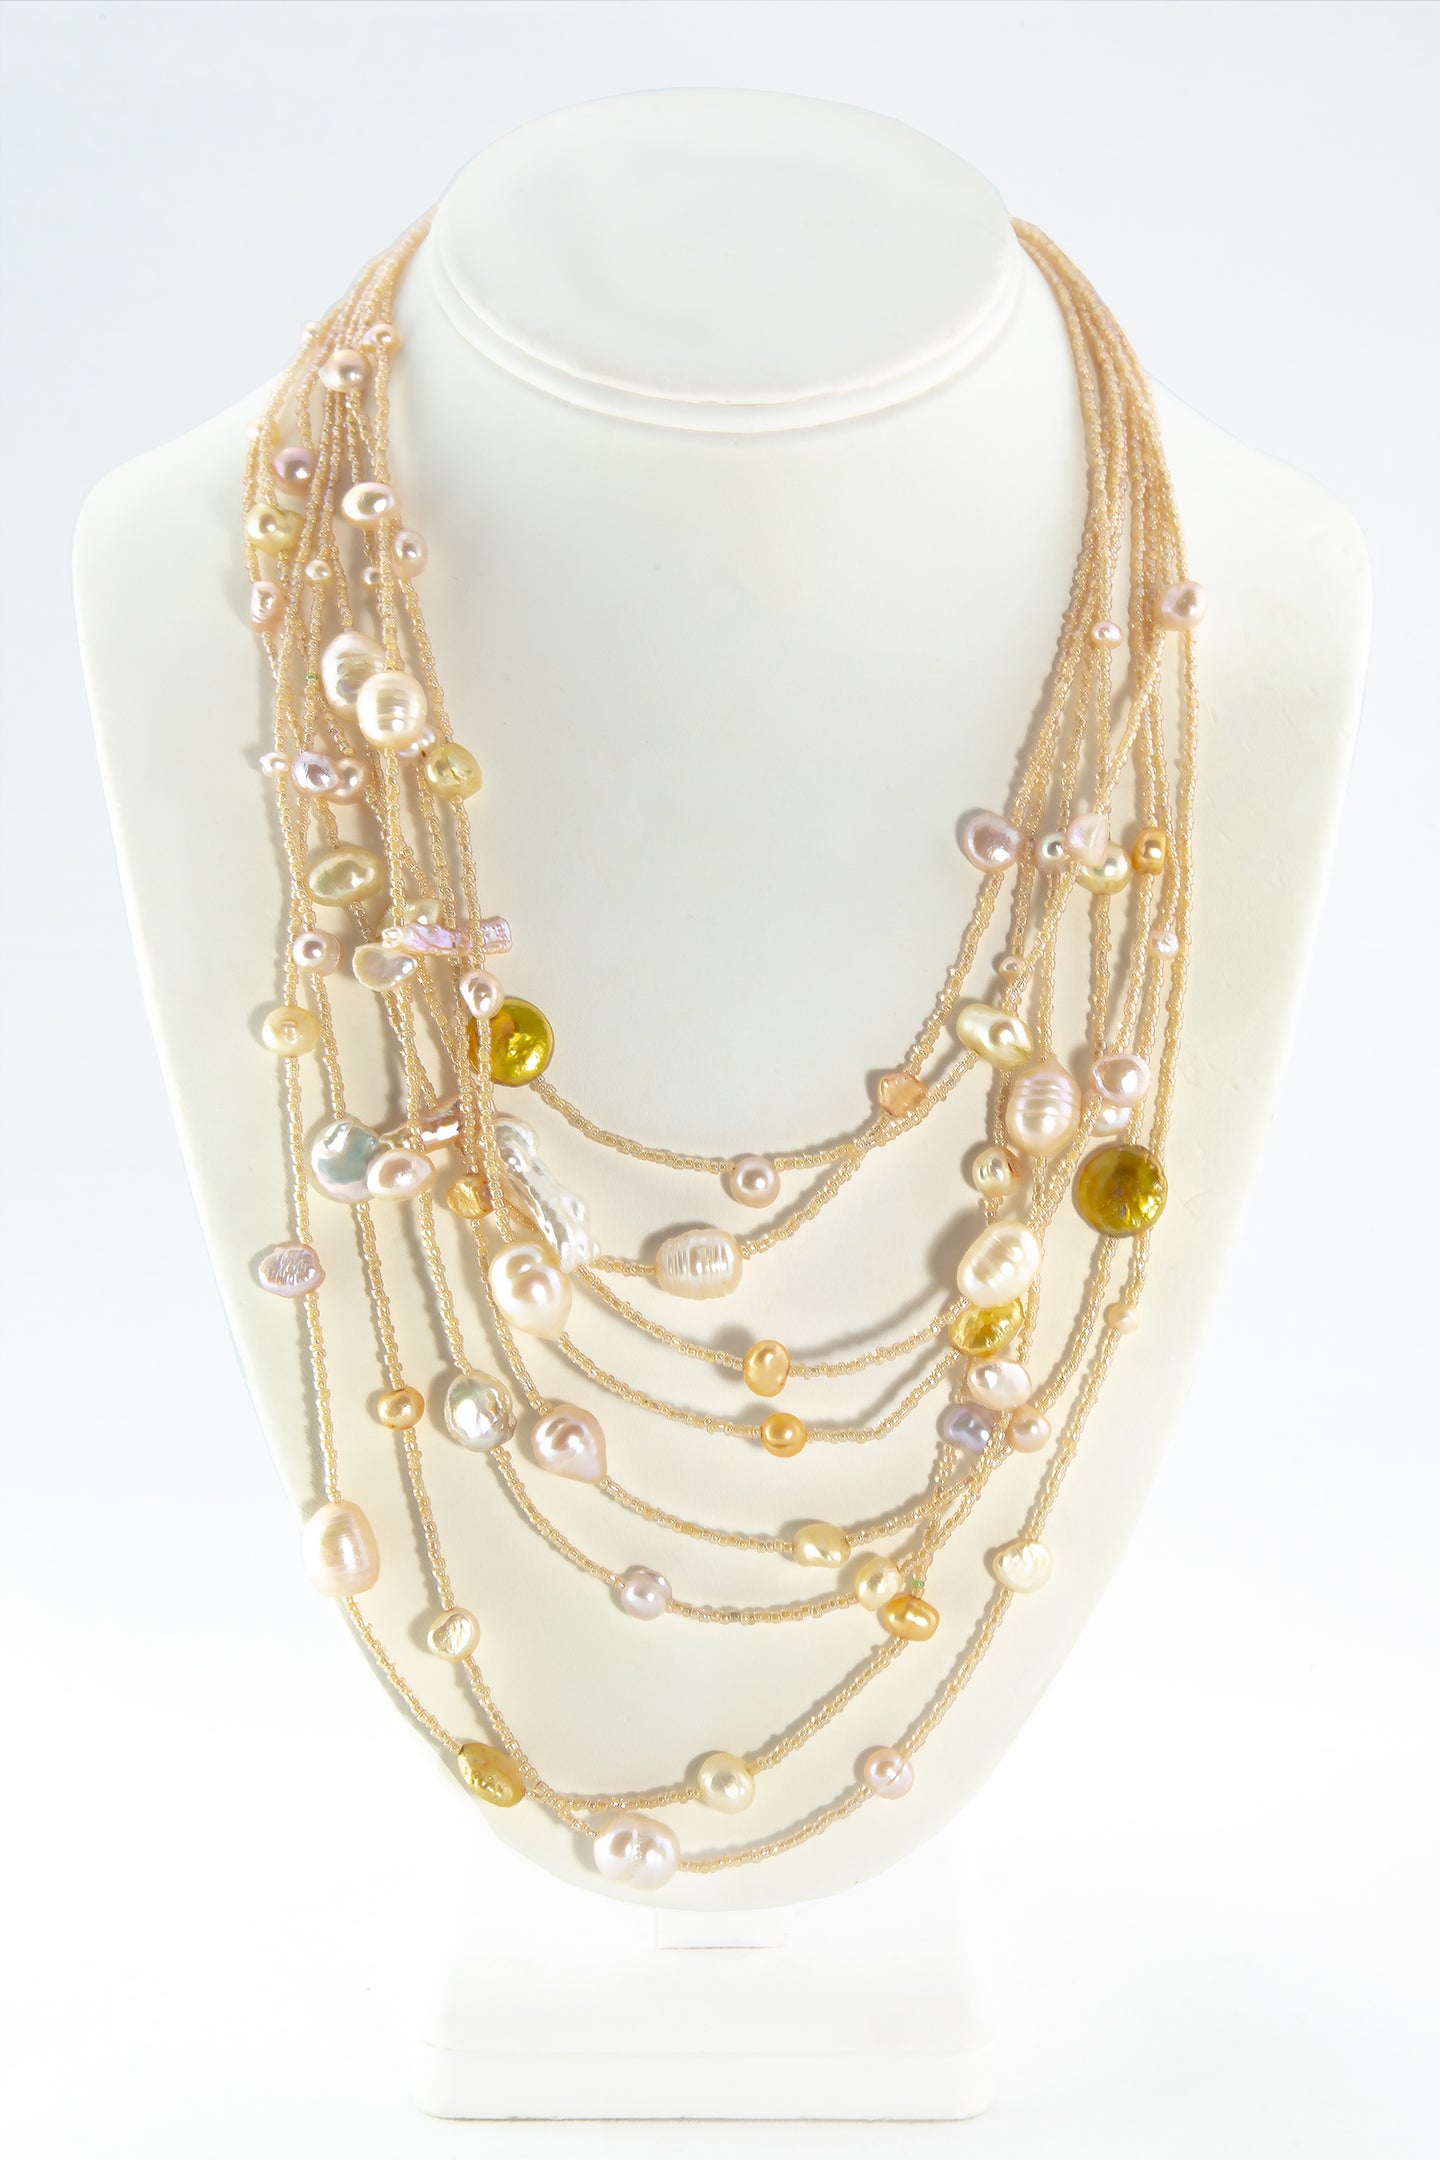 ARTISAN FRESHWATER PEARL IRIDESCENT BEAD MULTI-STRAND WATERFALL LAYERED NECKLACE GOLD COLORED